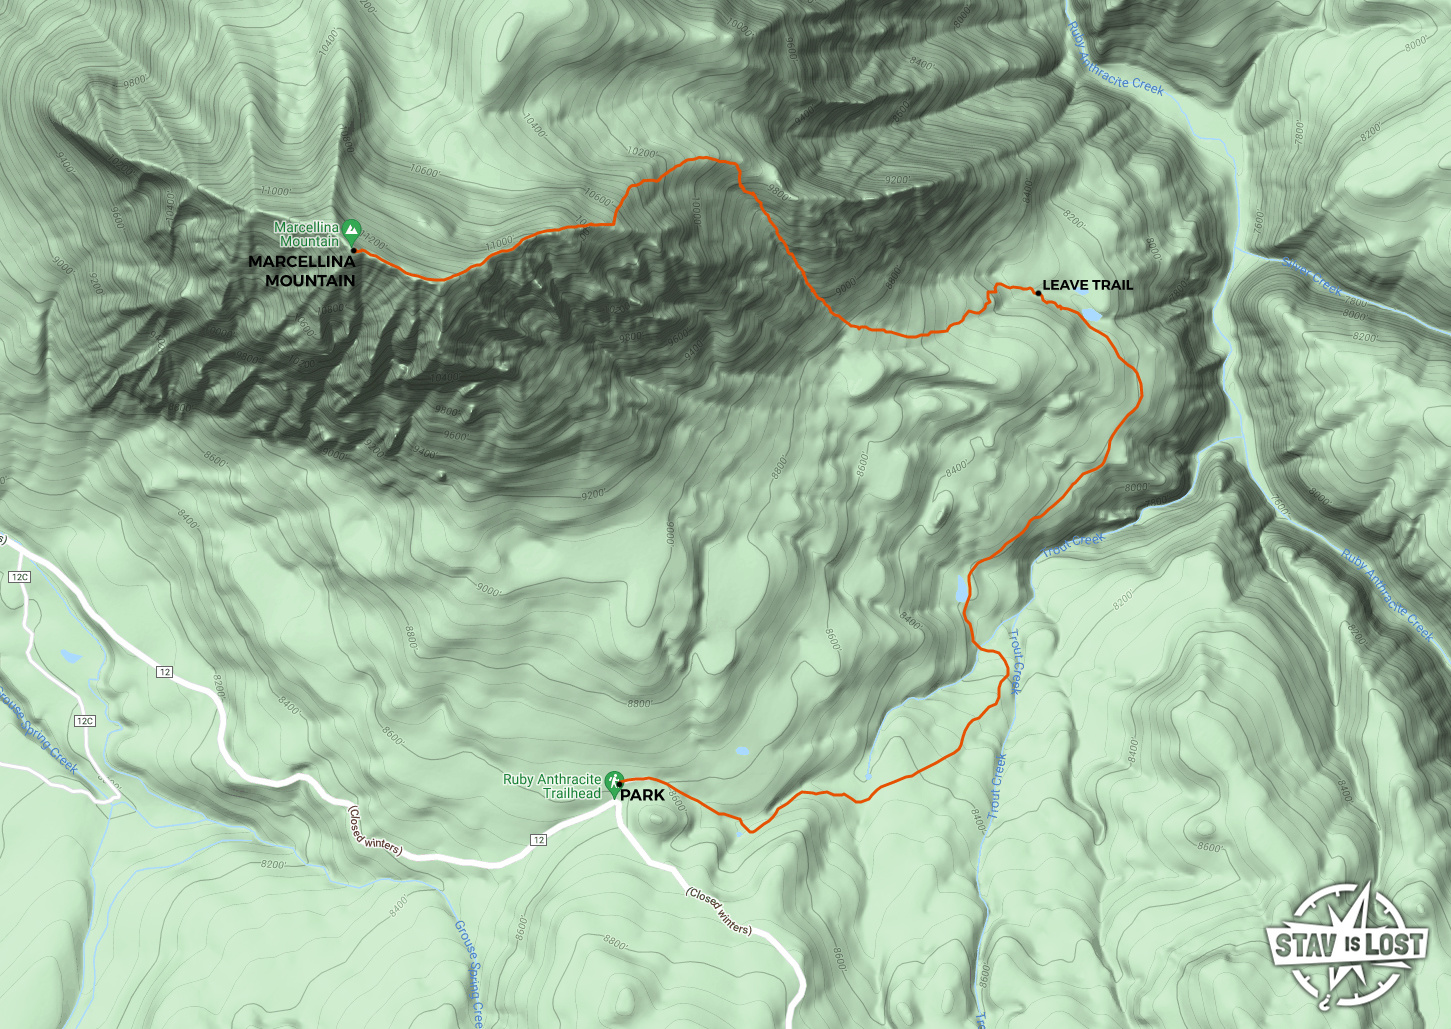 map for Marcellina Mountain by stav is lost